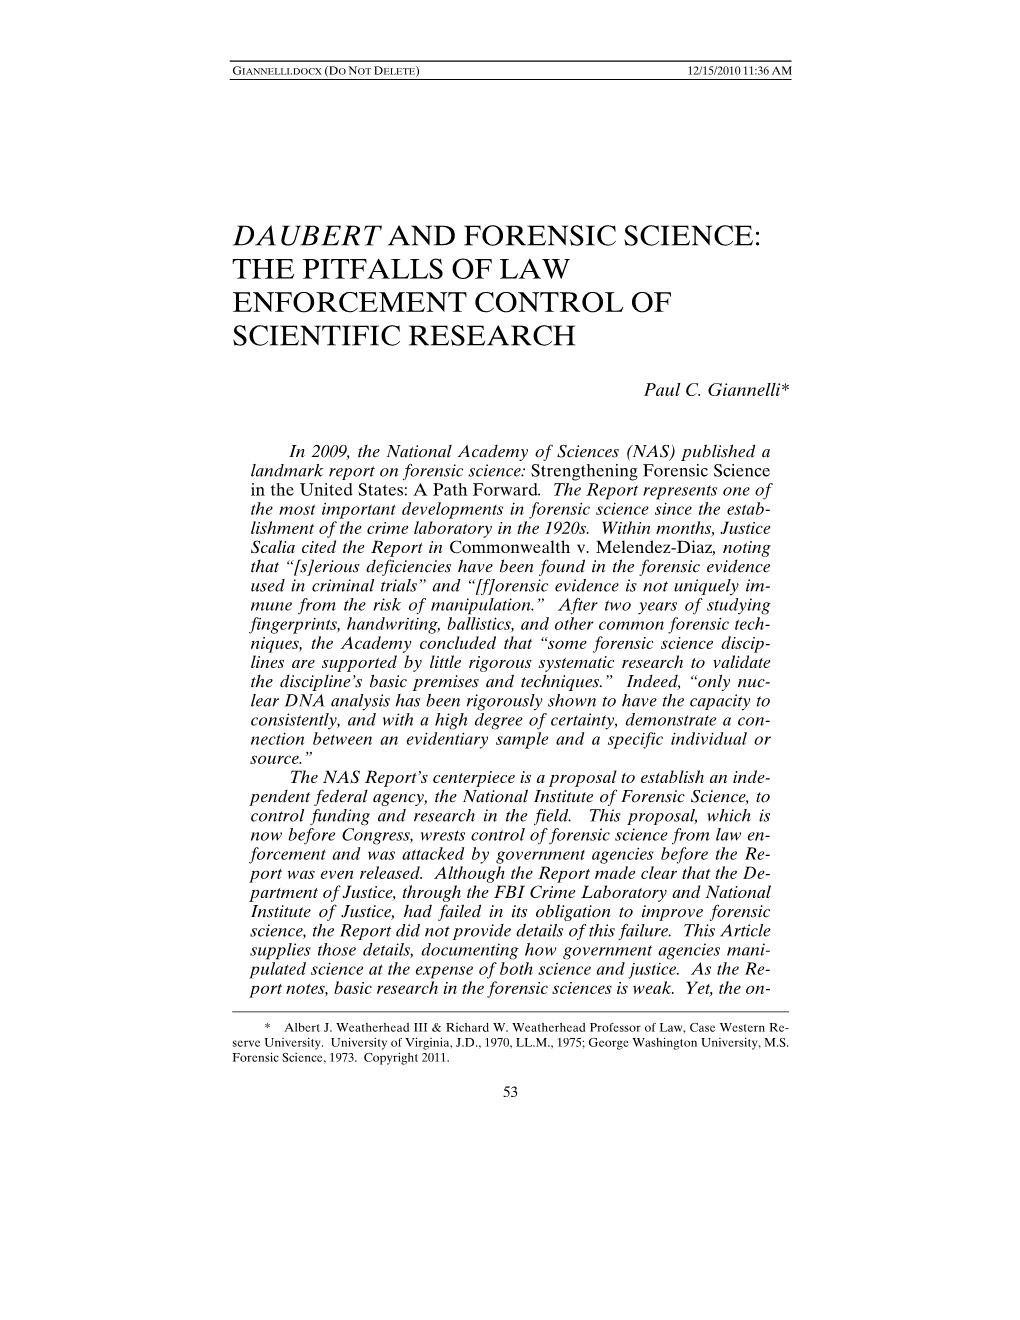 Daubert and Forensic Science: the Pitfalls of Law Enforcement Control of Scientific Research